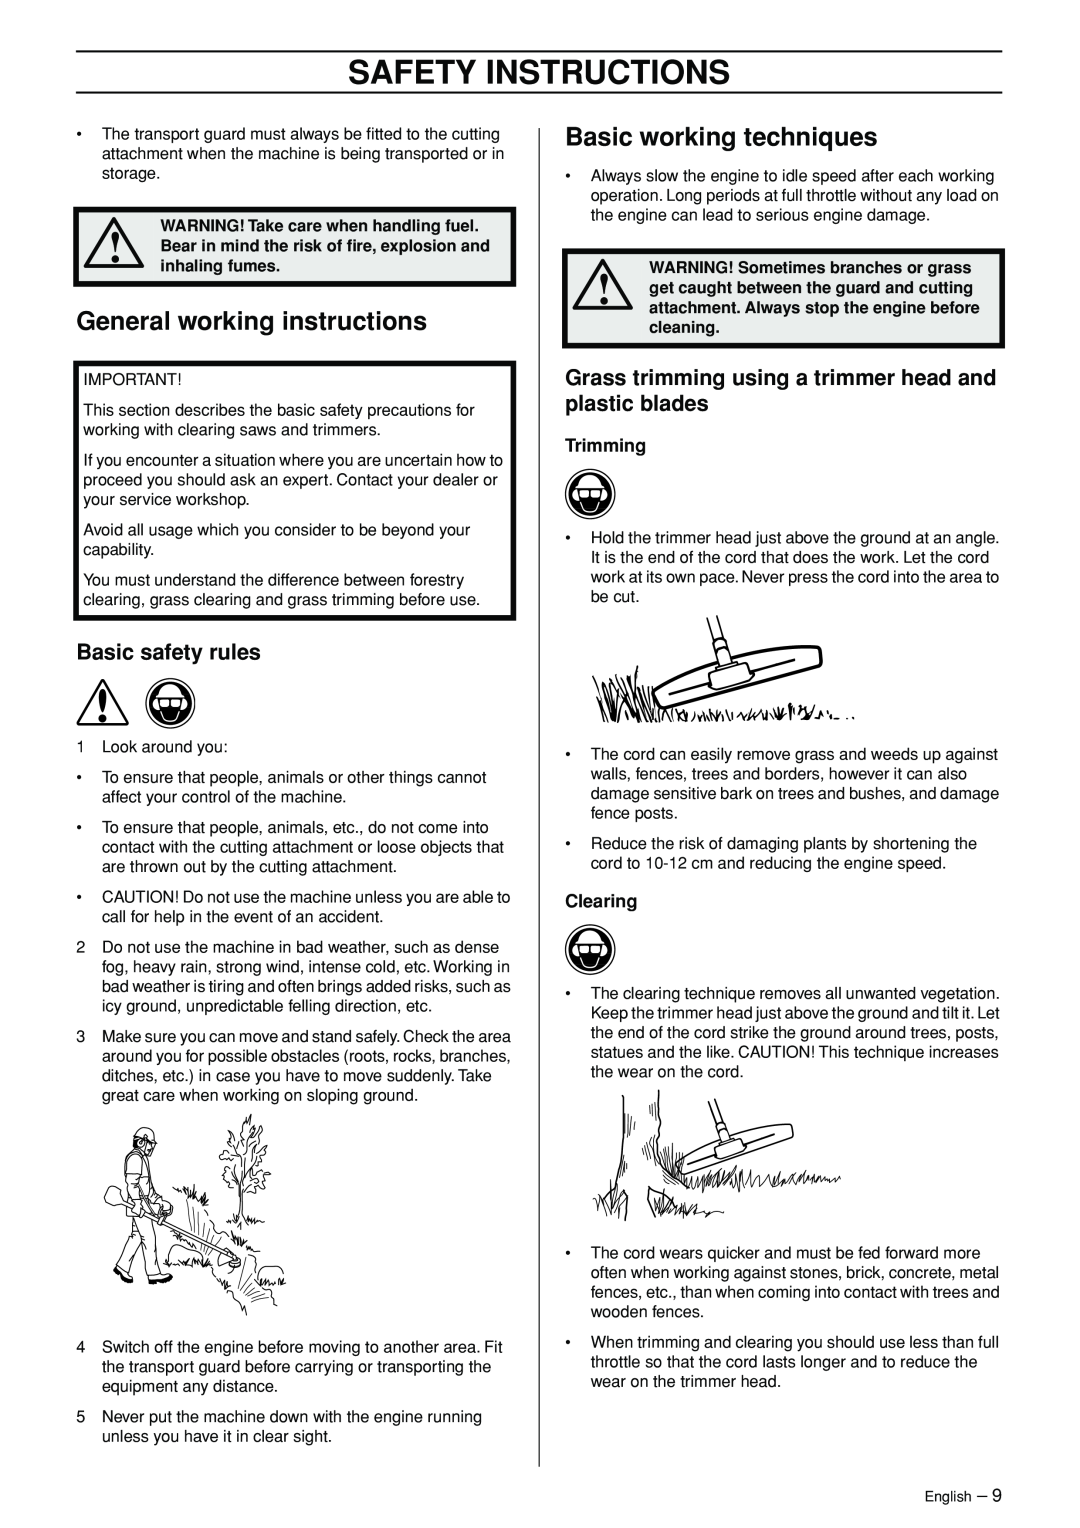 Husqvarna 326L manual General working instructions, Basic working techniques, Safety Instructions, Trimming, Clearing 